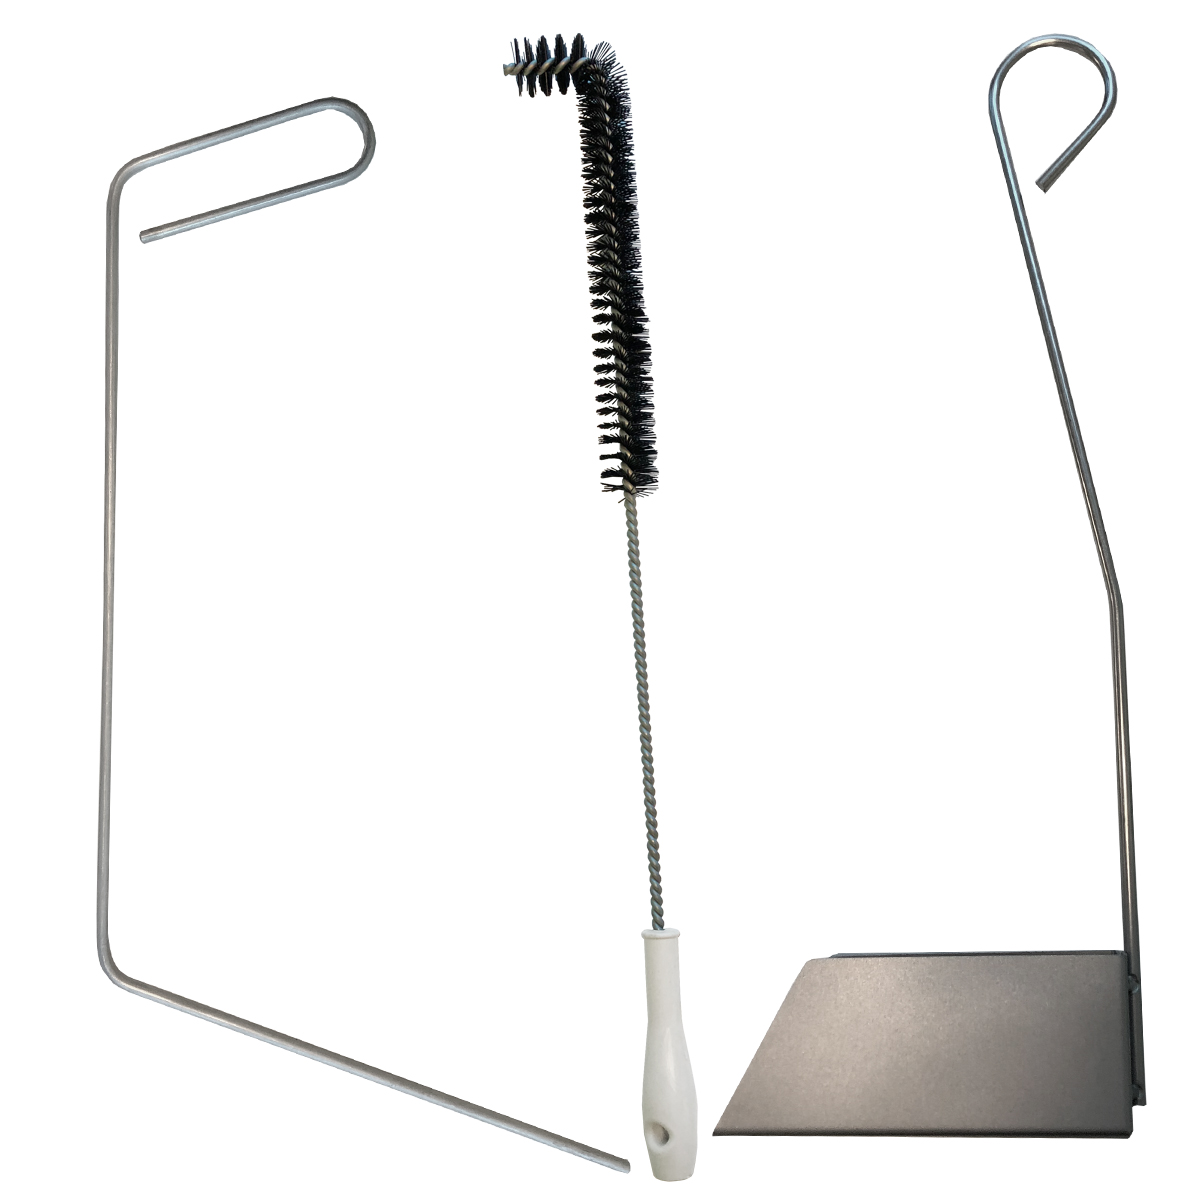 Cater-Cook Commercial Fryer Cleaning Accessories Kit - CK8327